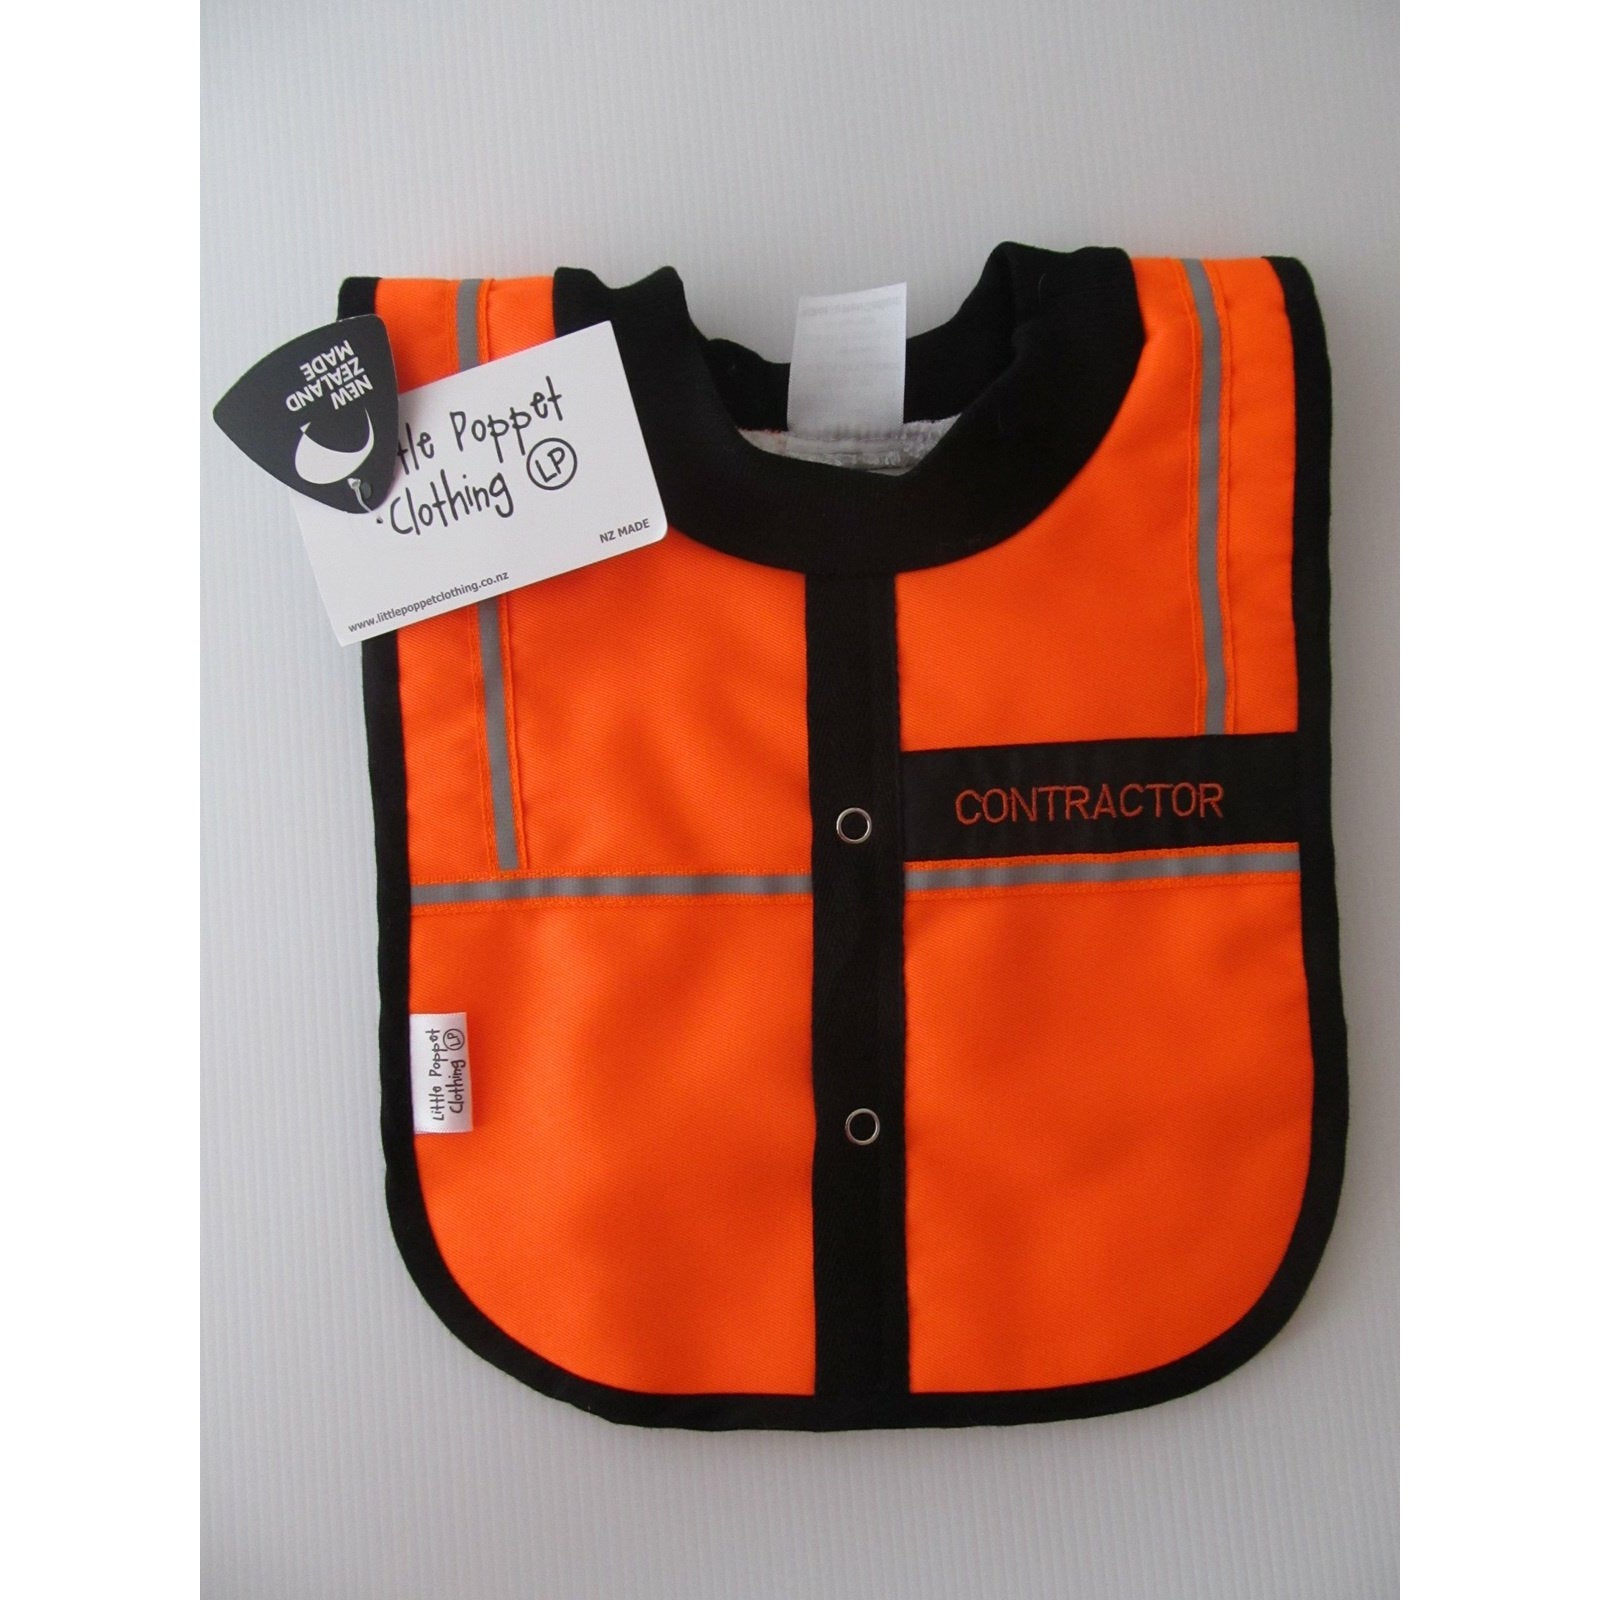 Contractor - Bib Little Poppet Clothing